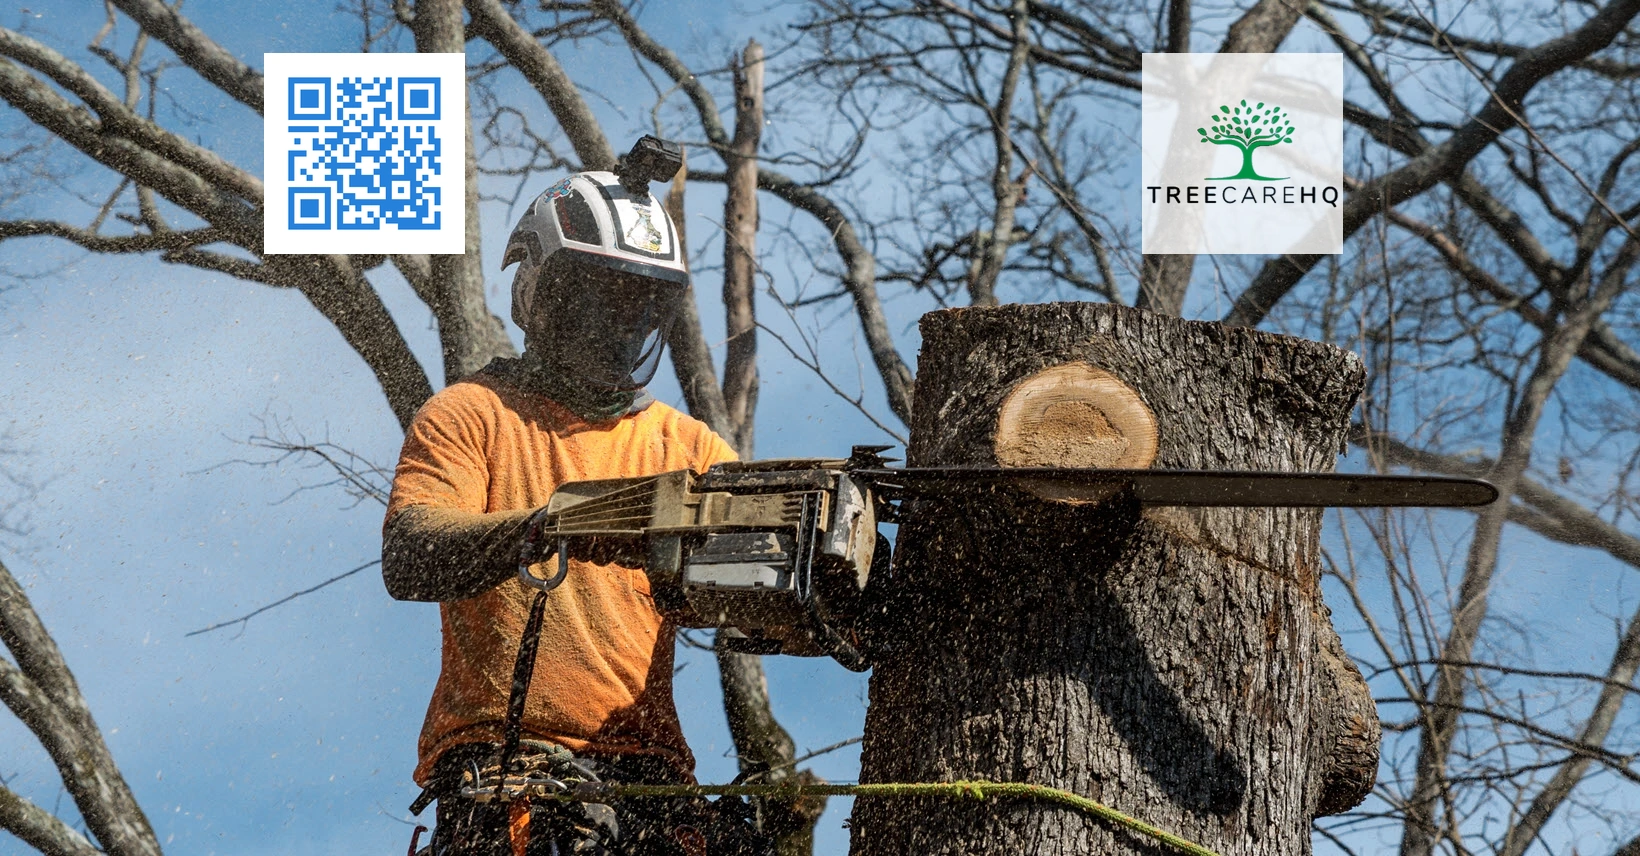 TreeCareHQ Winchester Settles Tree Care Problems For Local Residents